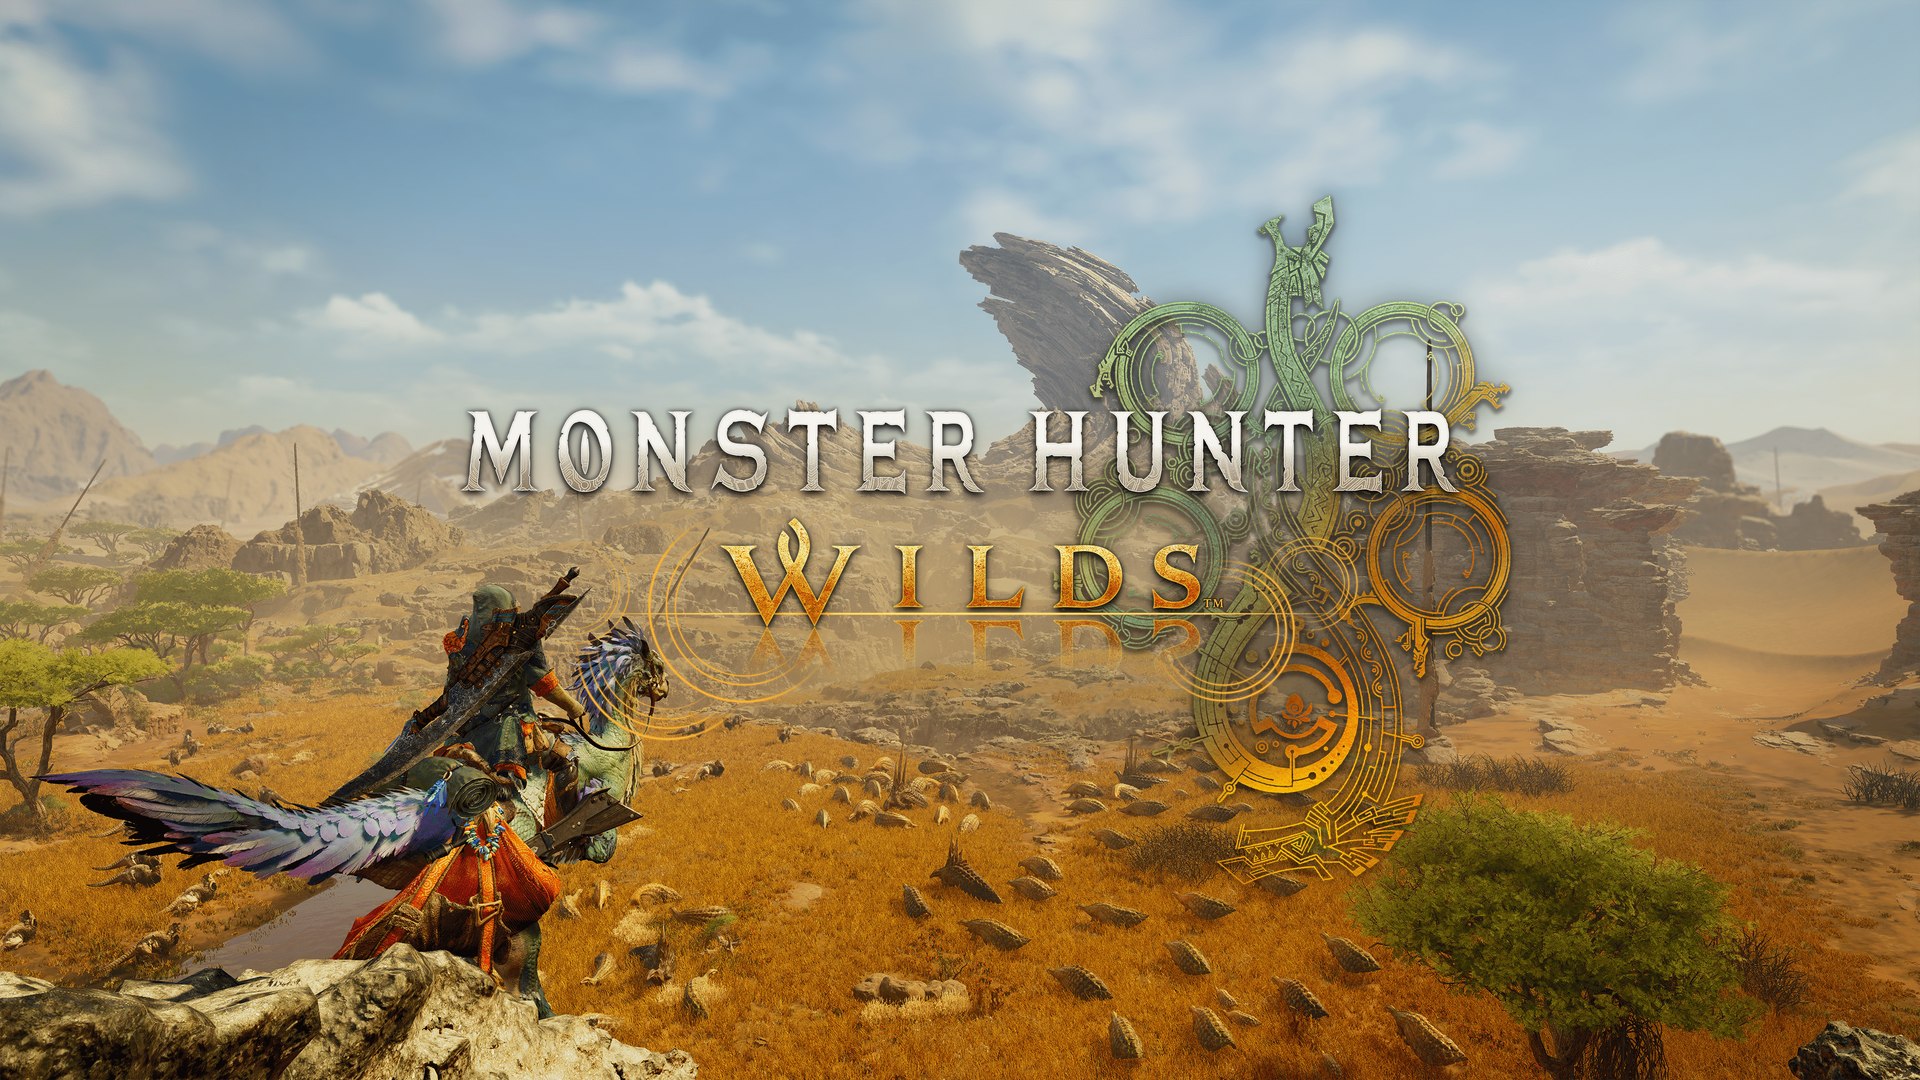 Monster Hunter Wilds - Bande-annonce - Vidéo Dailymotion